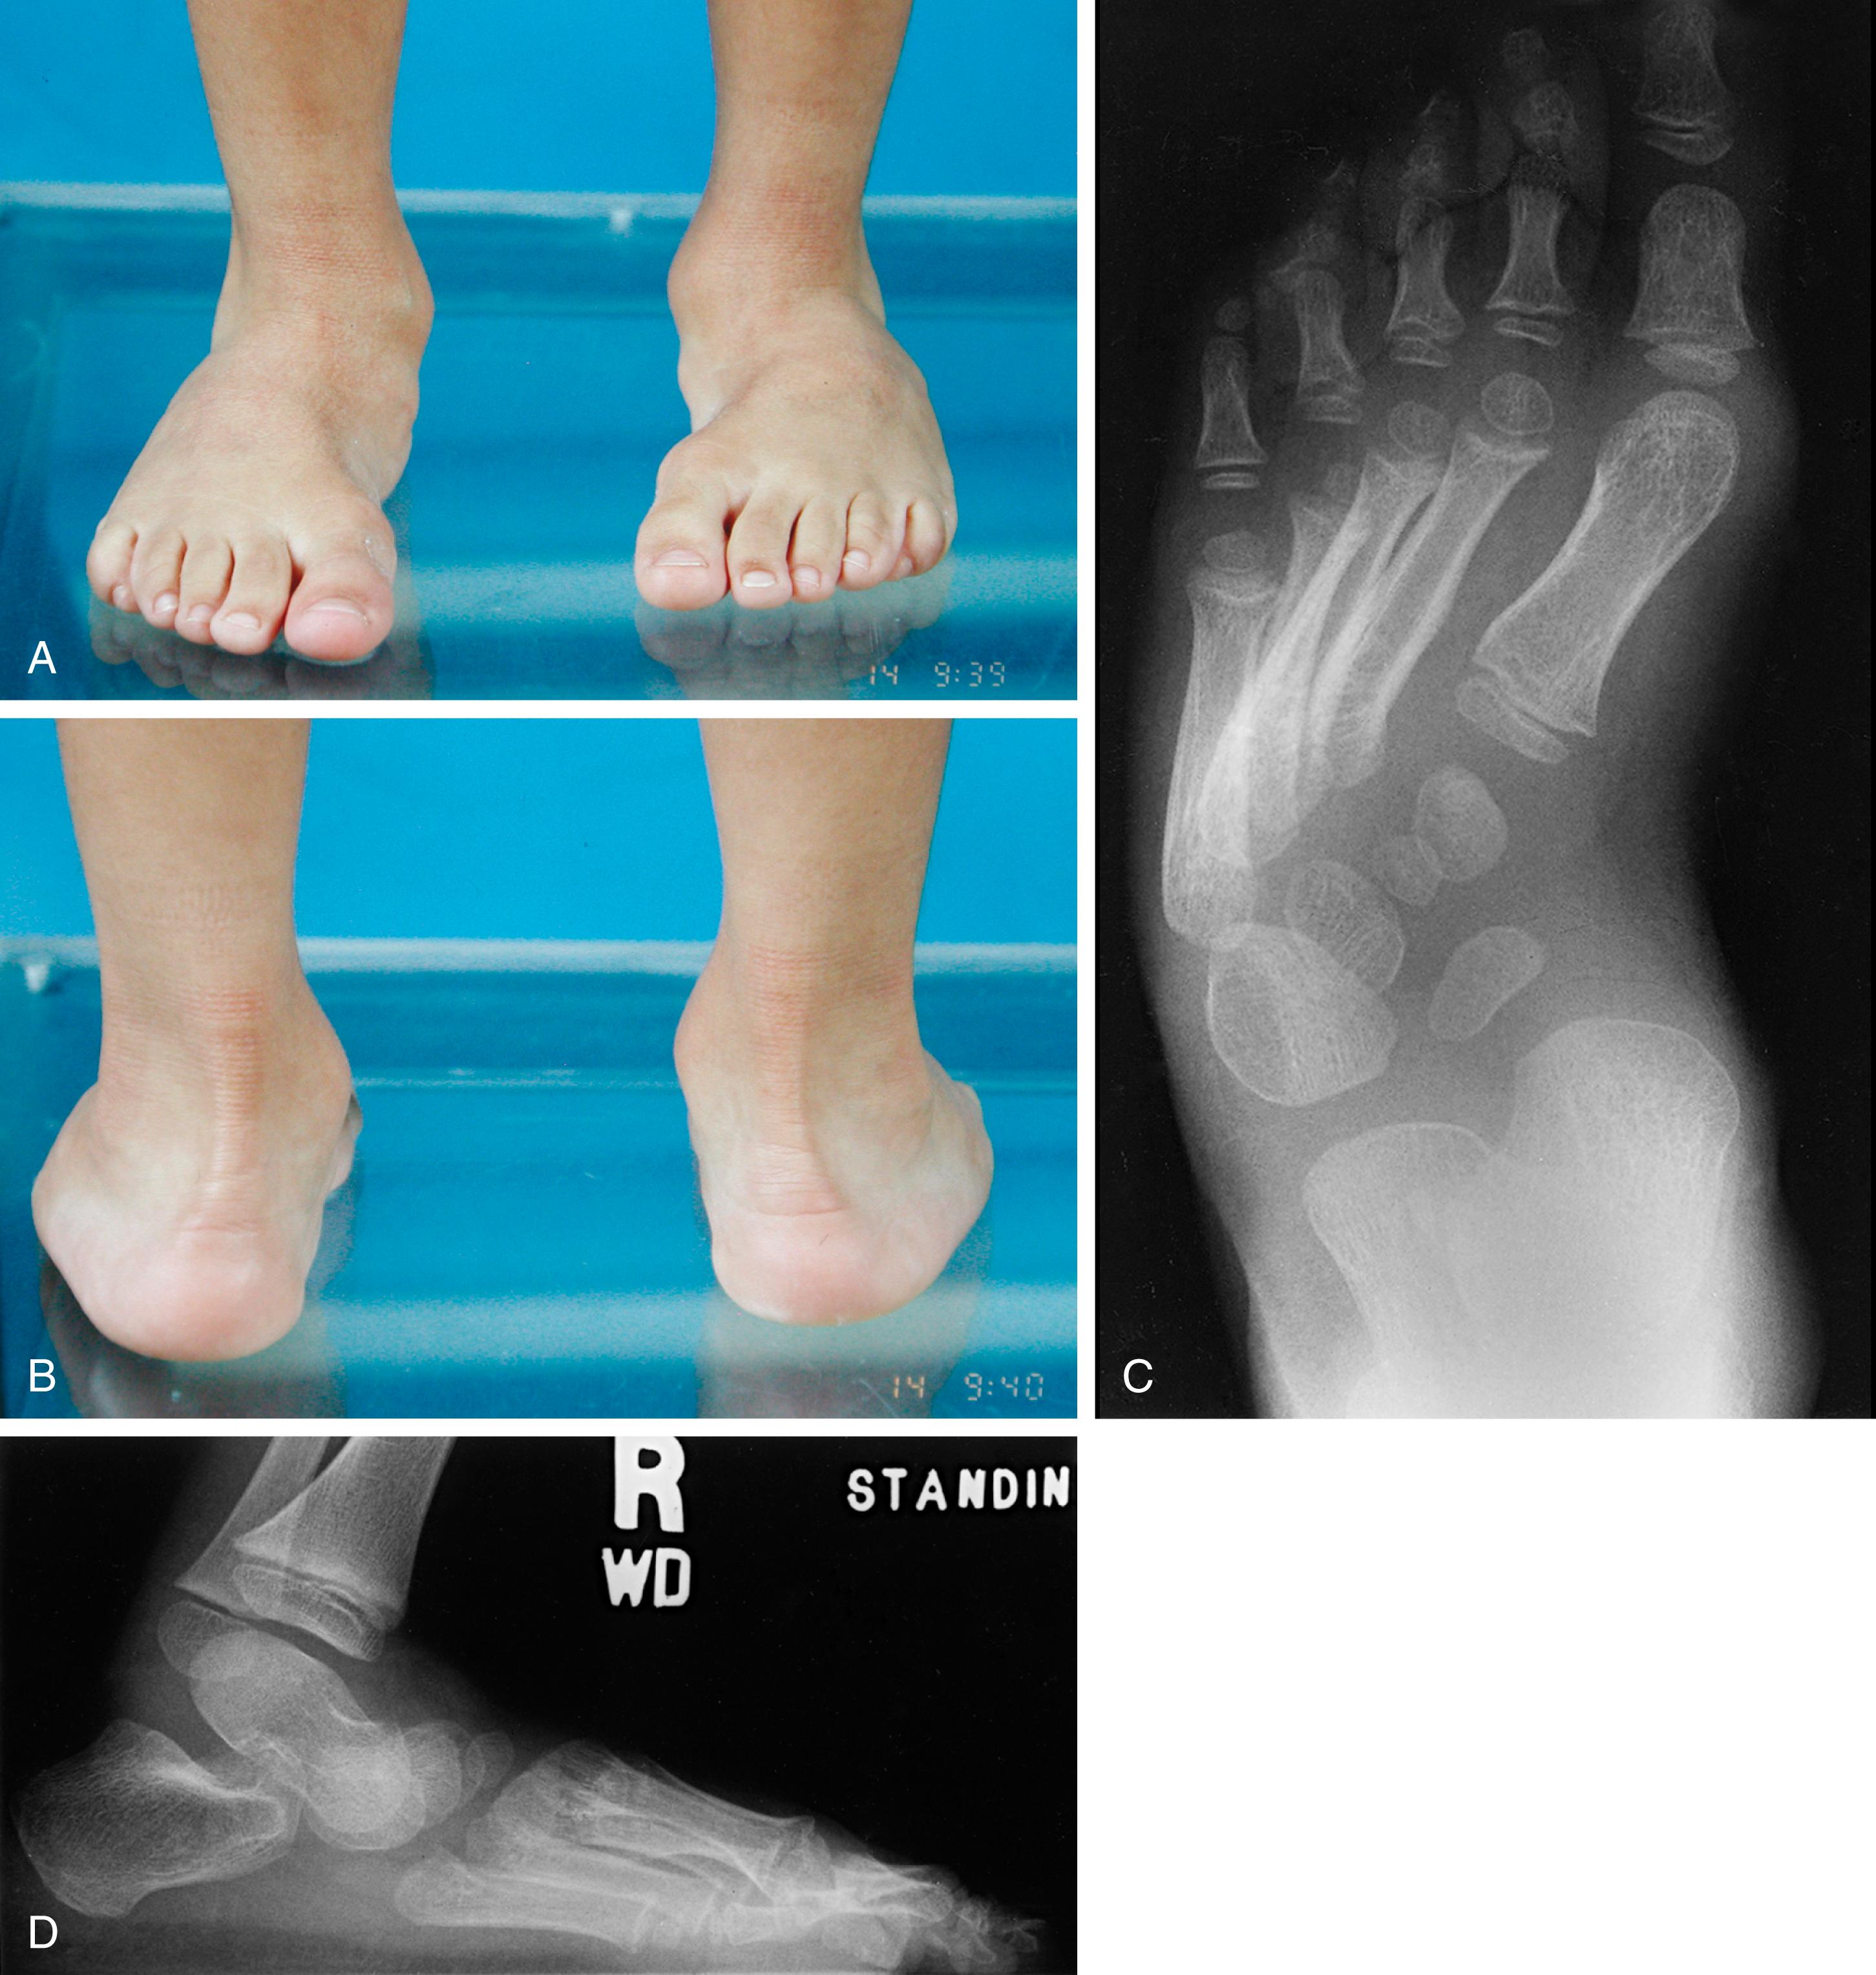 FIG. 19.38, (A) Photograph of a child with skewfoot and a moderate degree of forefoot adduction. (B) Posterior view showing increased valgus of the heel. (C) Anteroposterior radiograph of a skewfoot showing marked adductus of the metatarsals with lateral subluxation of the navicular. (D) Lateral radiograph showing an increased talocalcaneal angle indicative of valgus of the hindfoot.